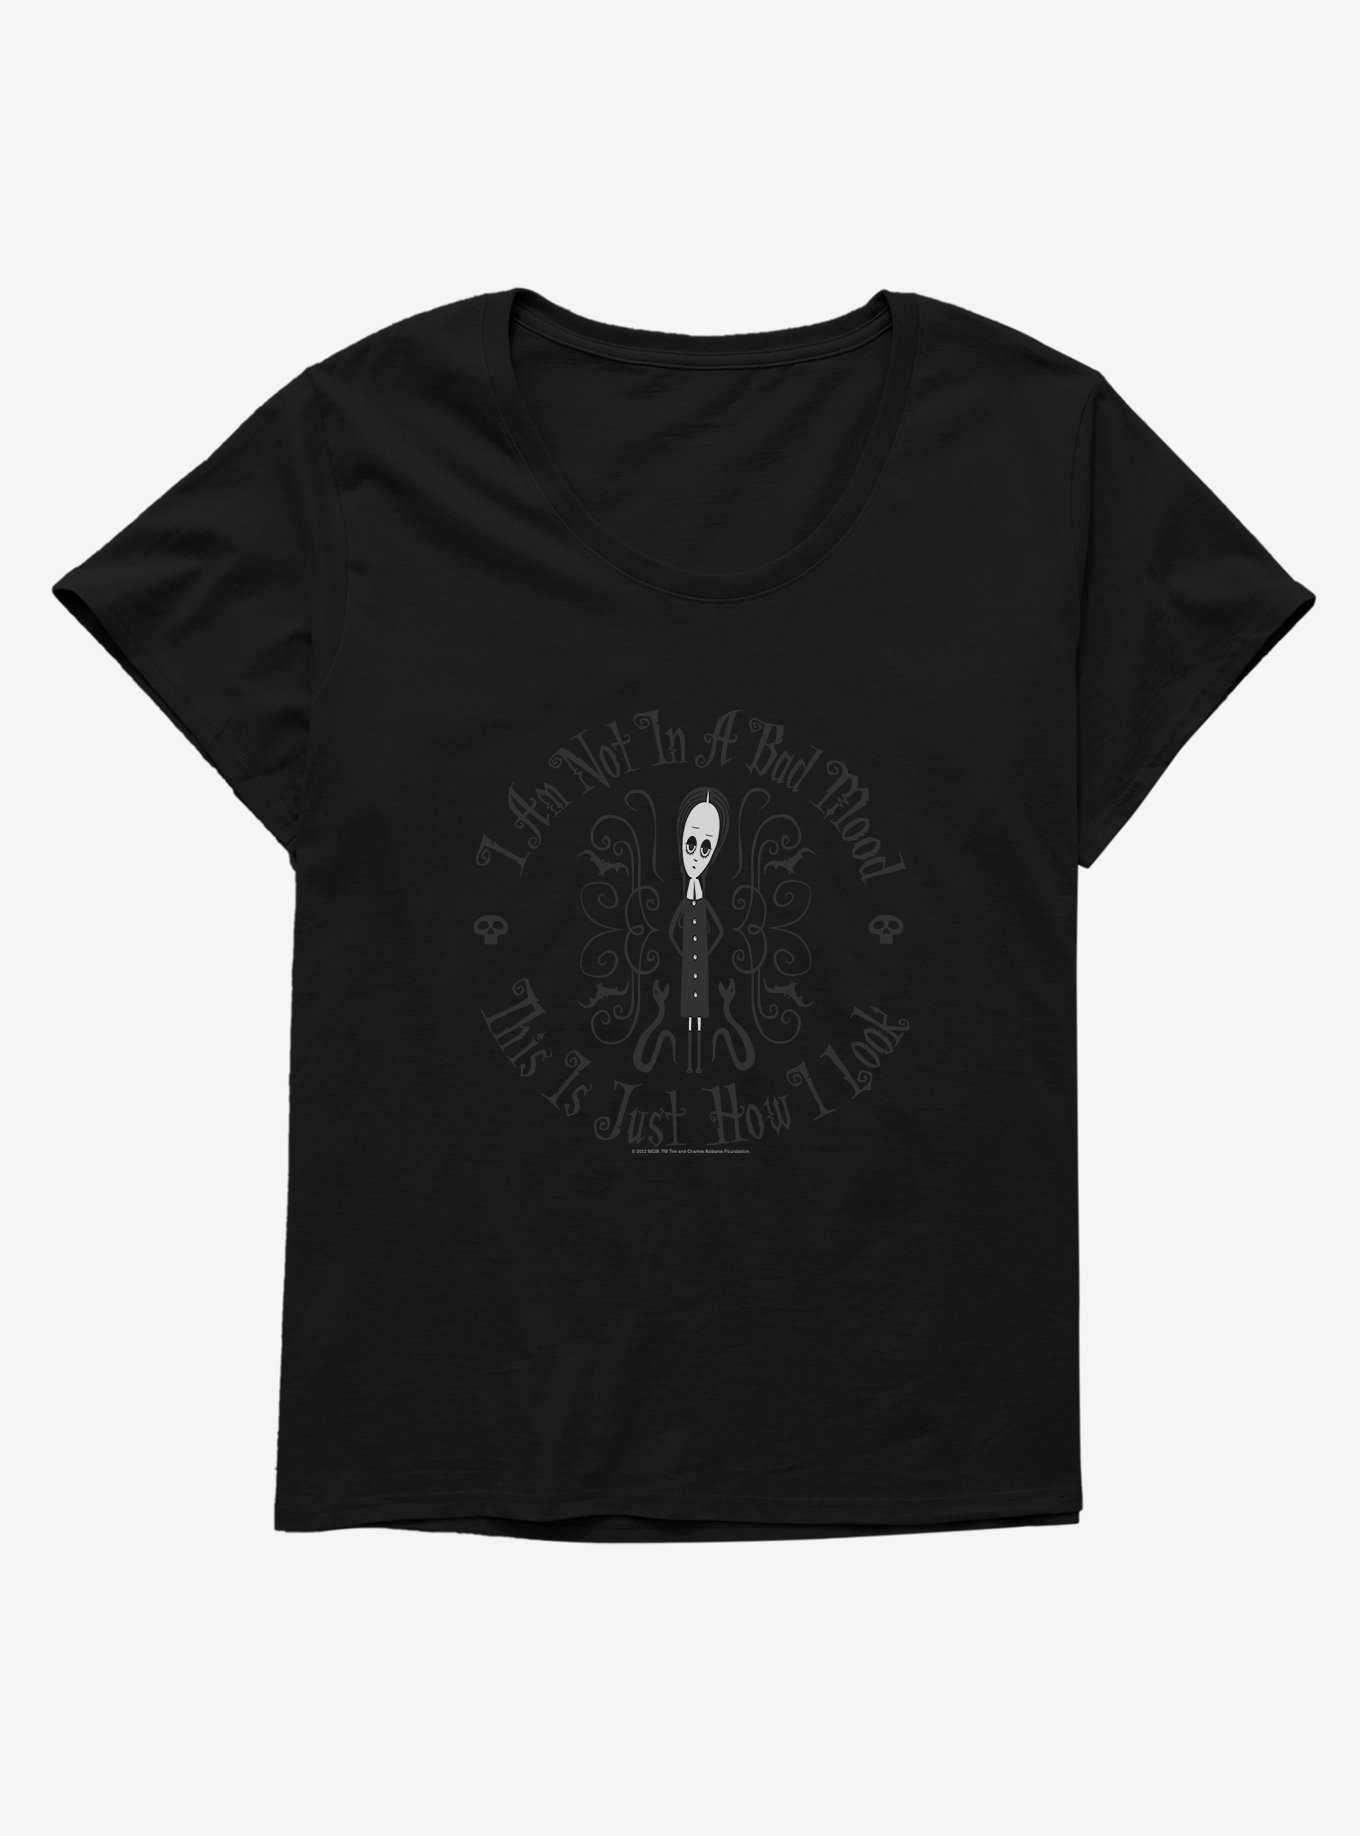 Addams Family Just How I Look Girls T-Shirt Plus Size, , hi-res